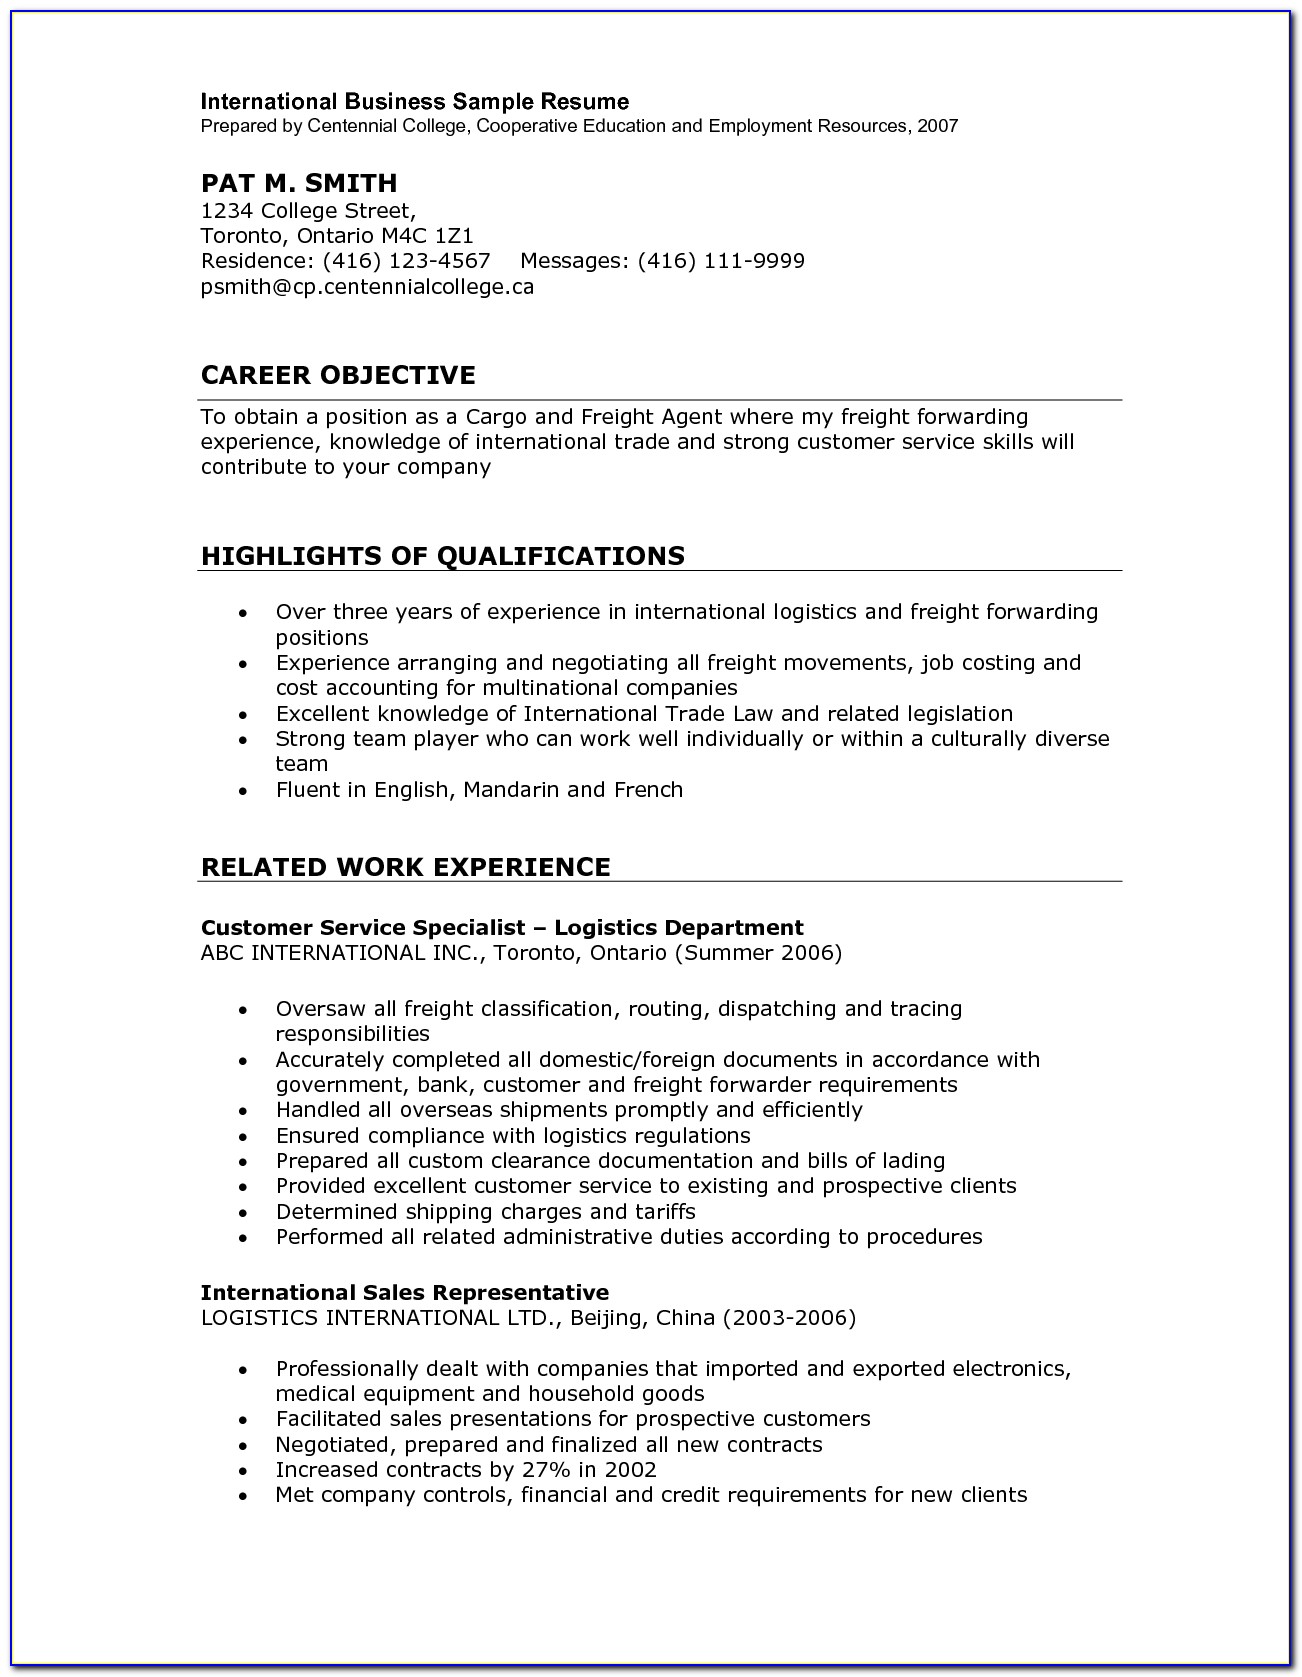 Resume Objective For Freight Forwarding Company